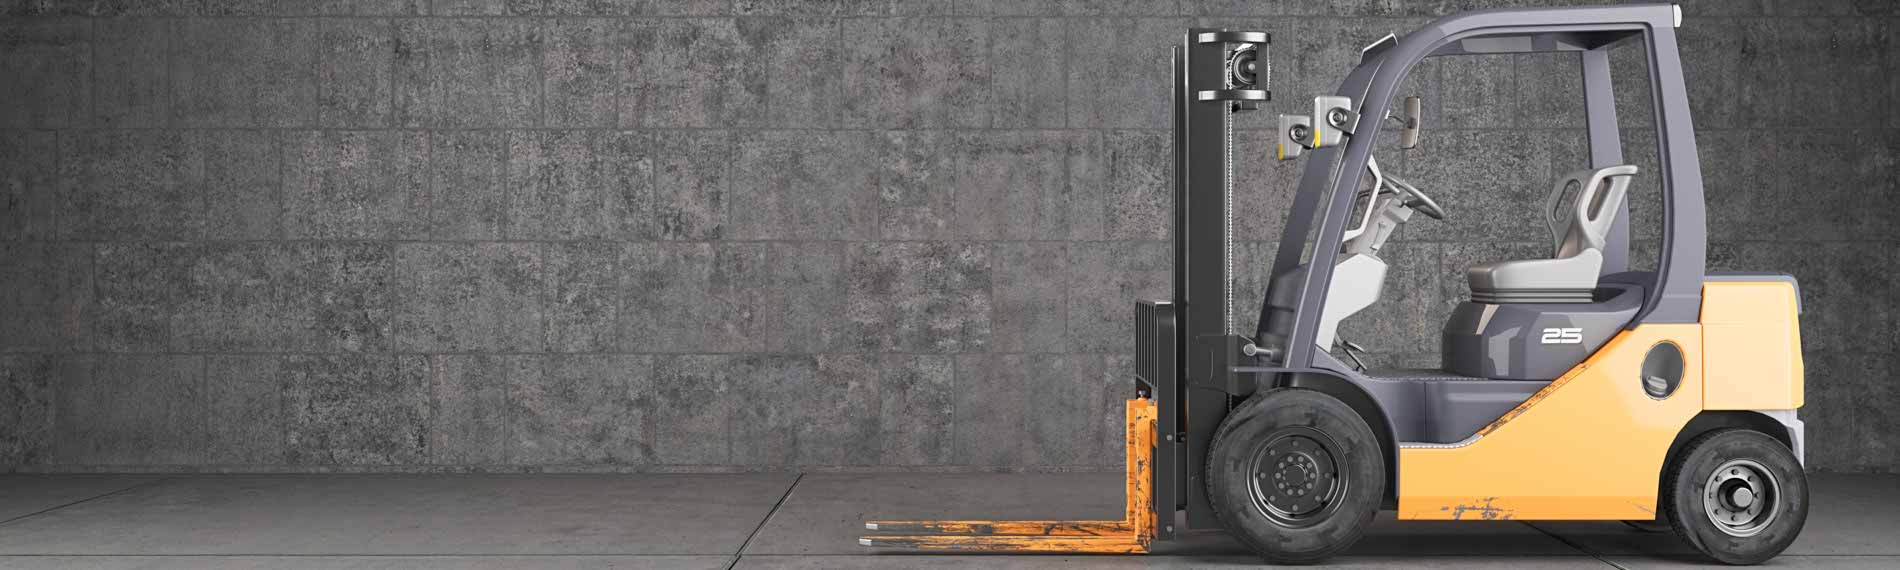 A photograph of a Forklift.